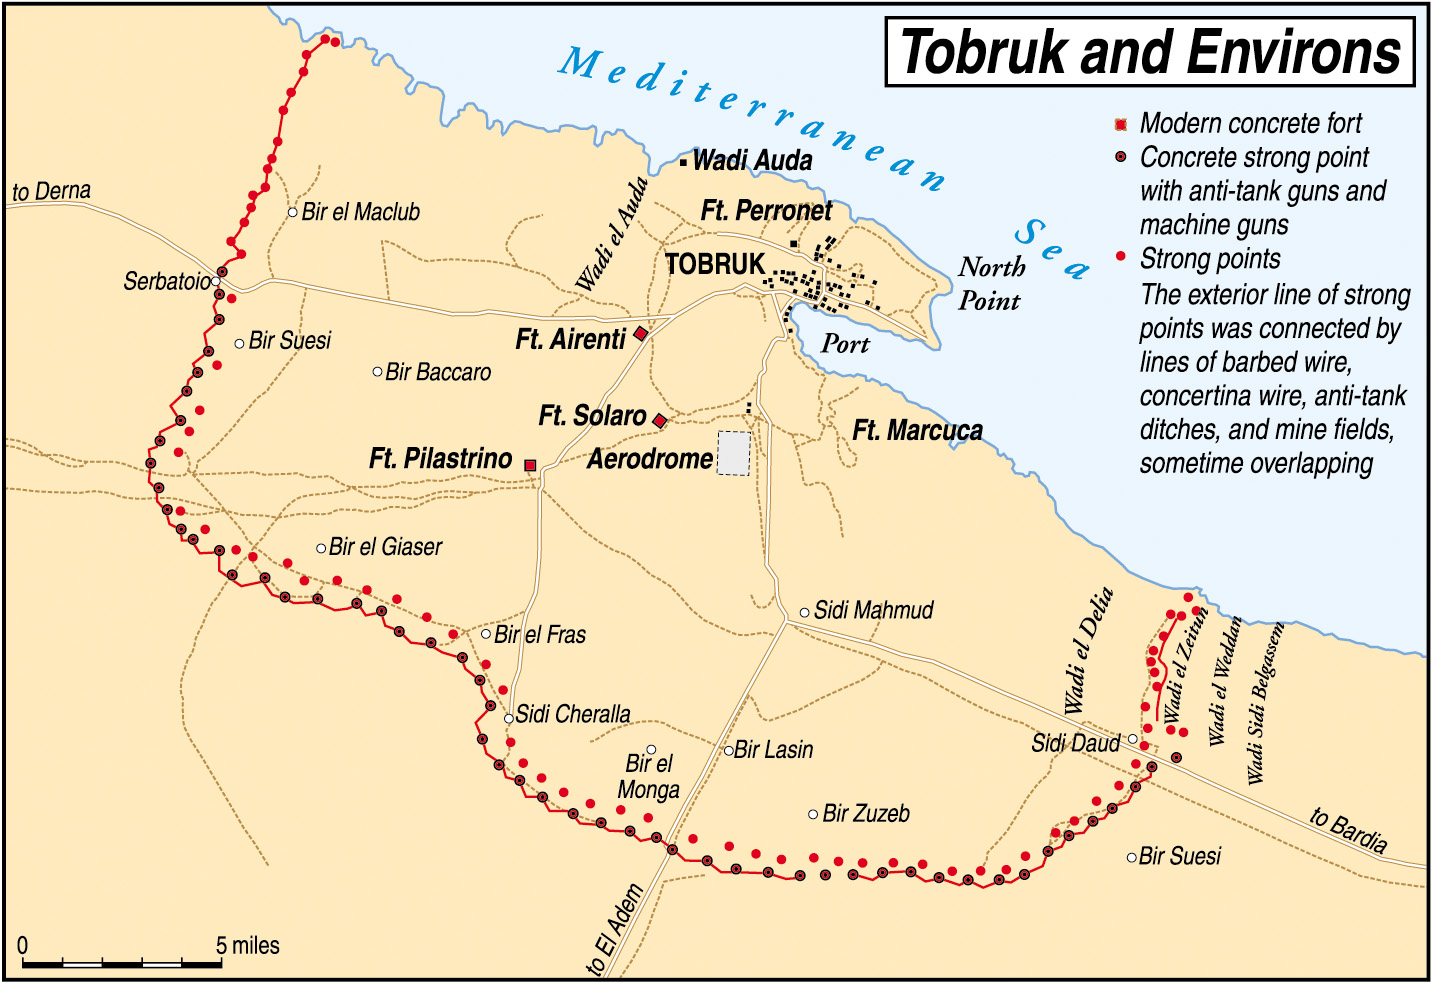 Troops of the British Commonwealth defended the Libyan seaport city of Tobruk against Erwin Rommel’s Afrika Korps from behind a formidable ring of desert defenses. 